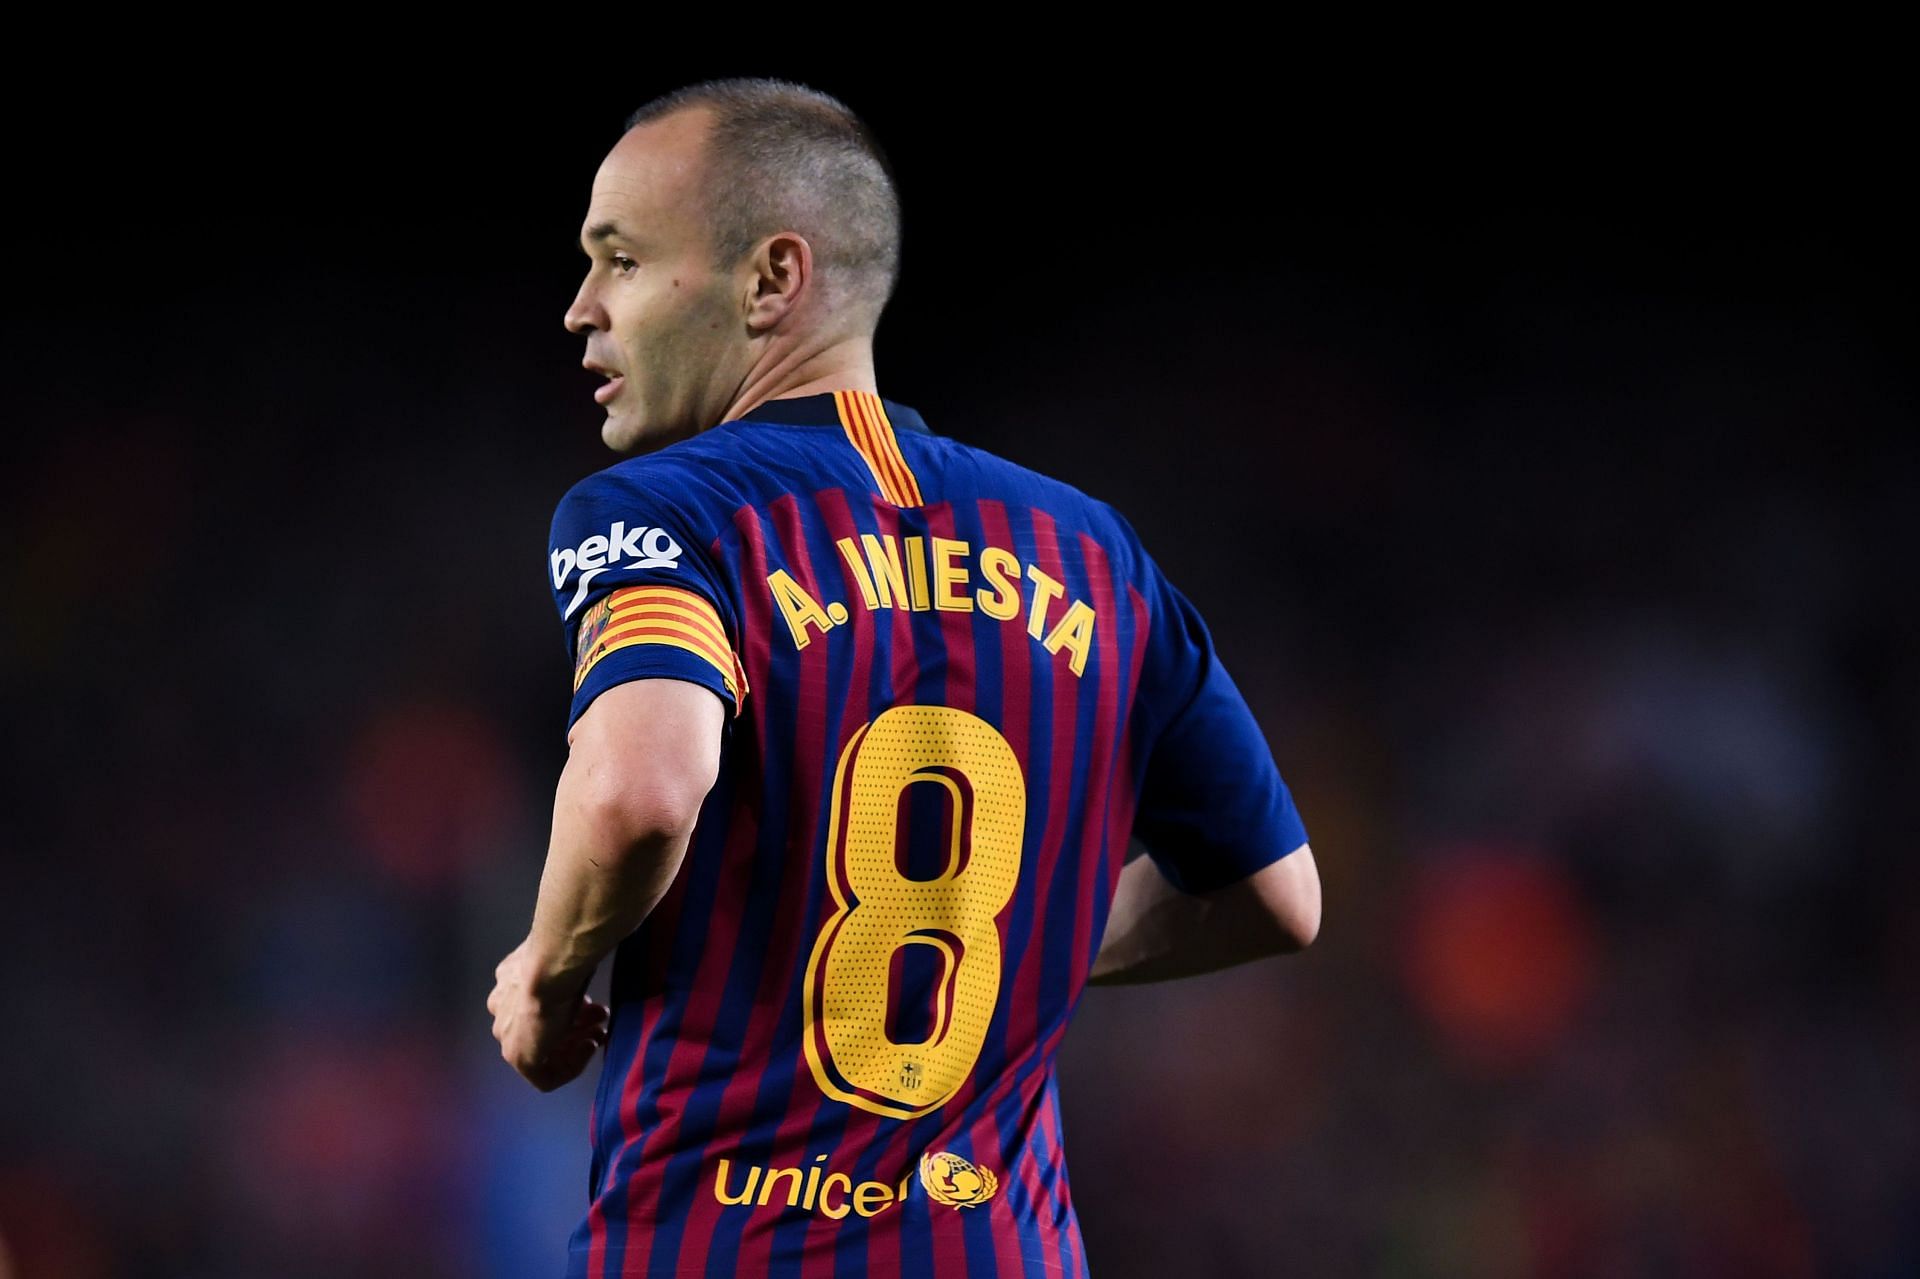 Iniesta graduated from the academy and joined the star-studded squad in the 2002-03 season